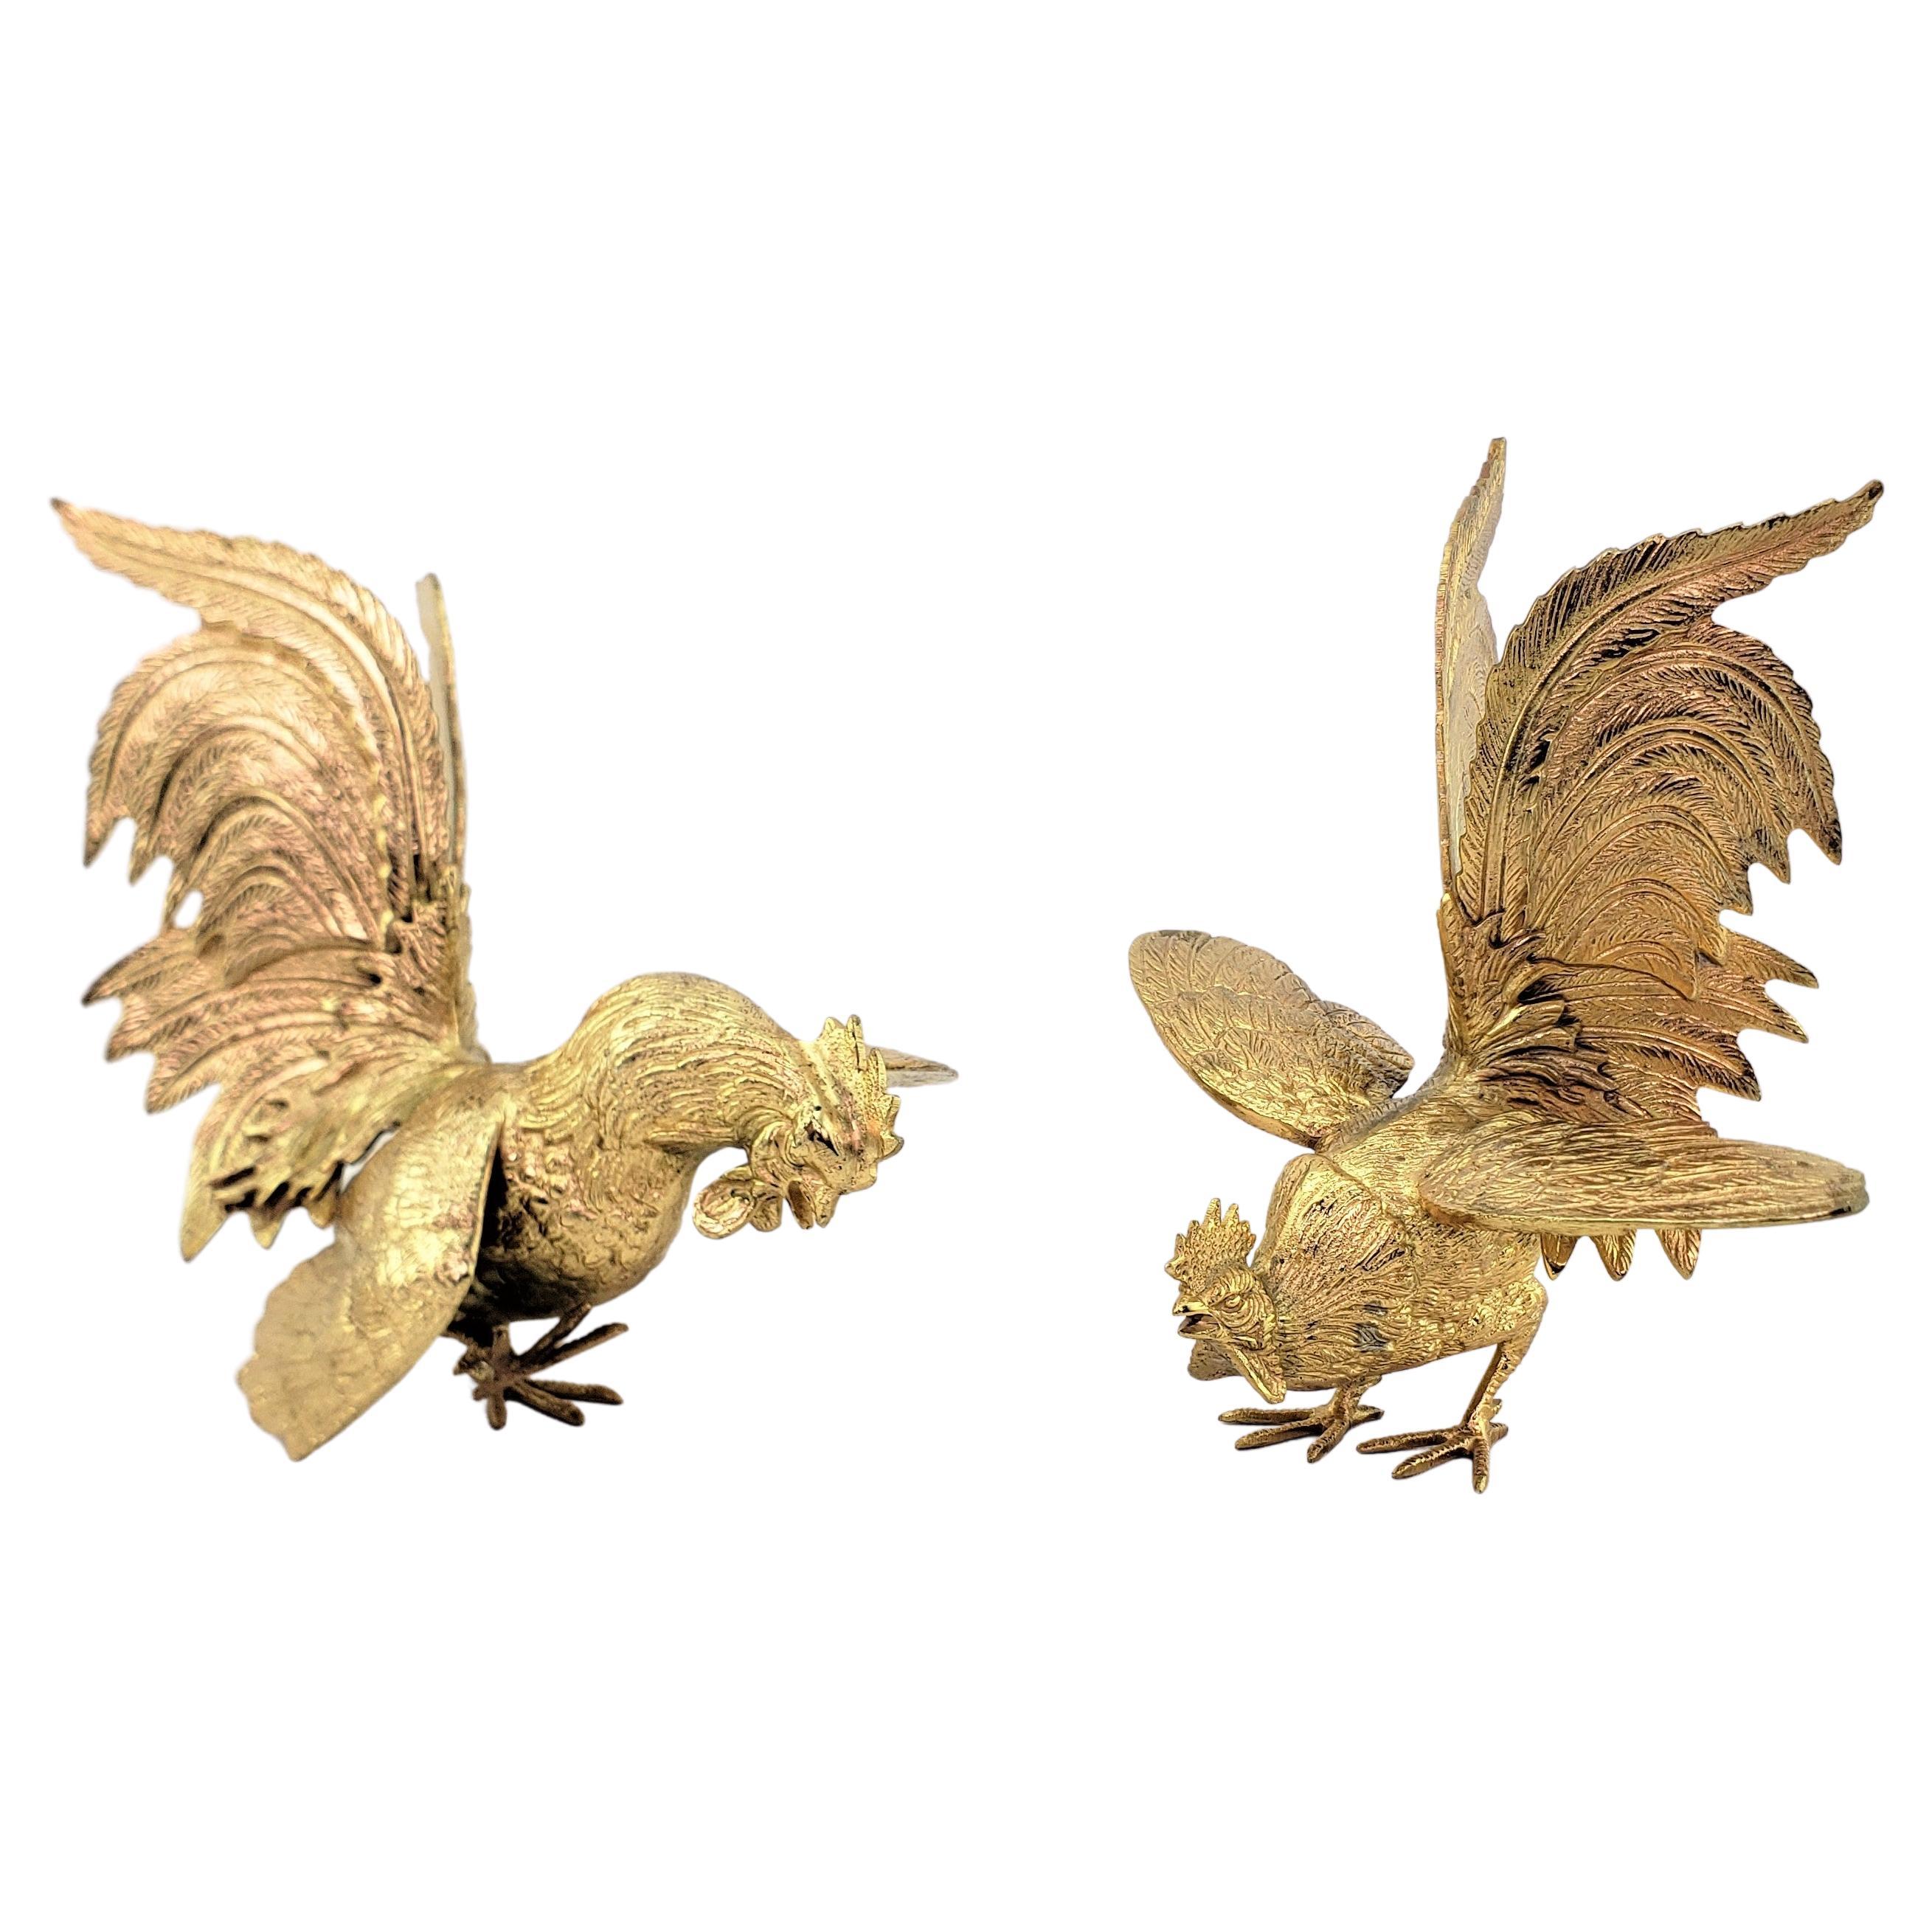 Pair of Ornate Gilt Finished Fighting Rooster or Cockerel Table Sculptures For Sale